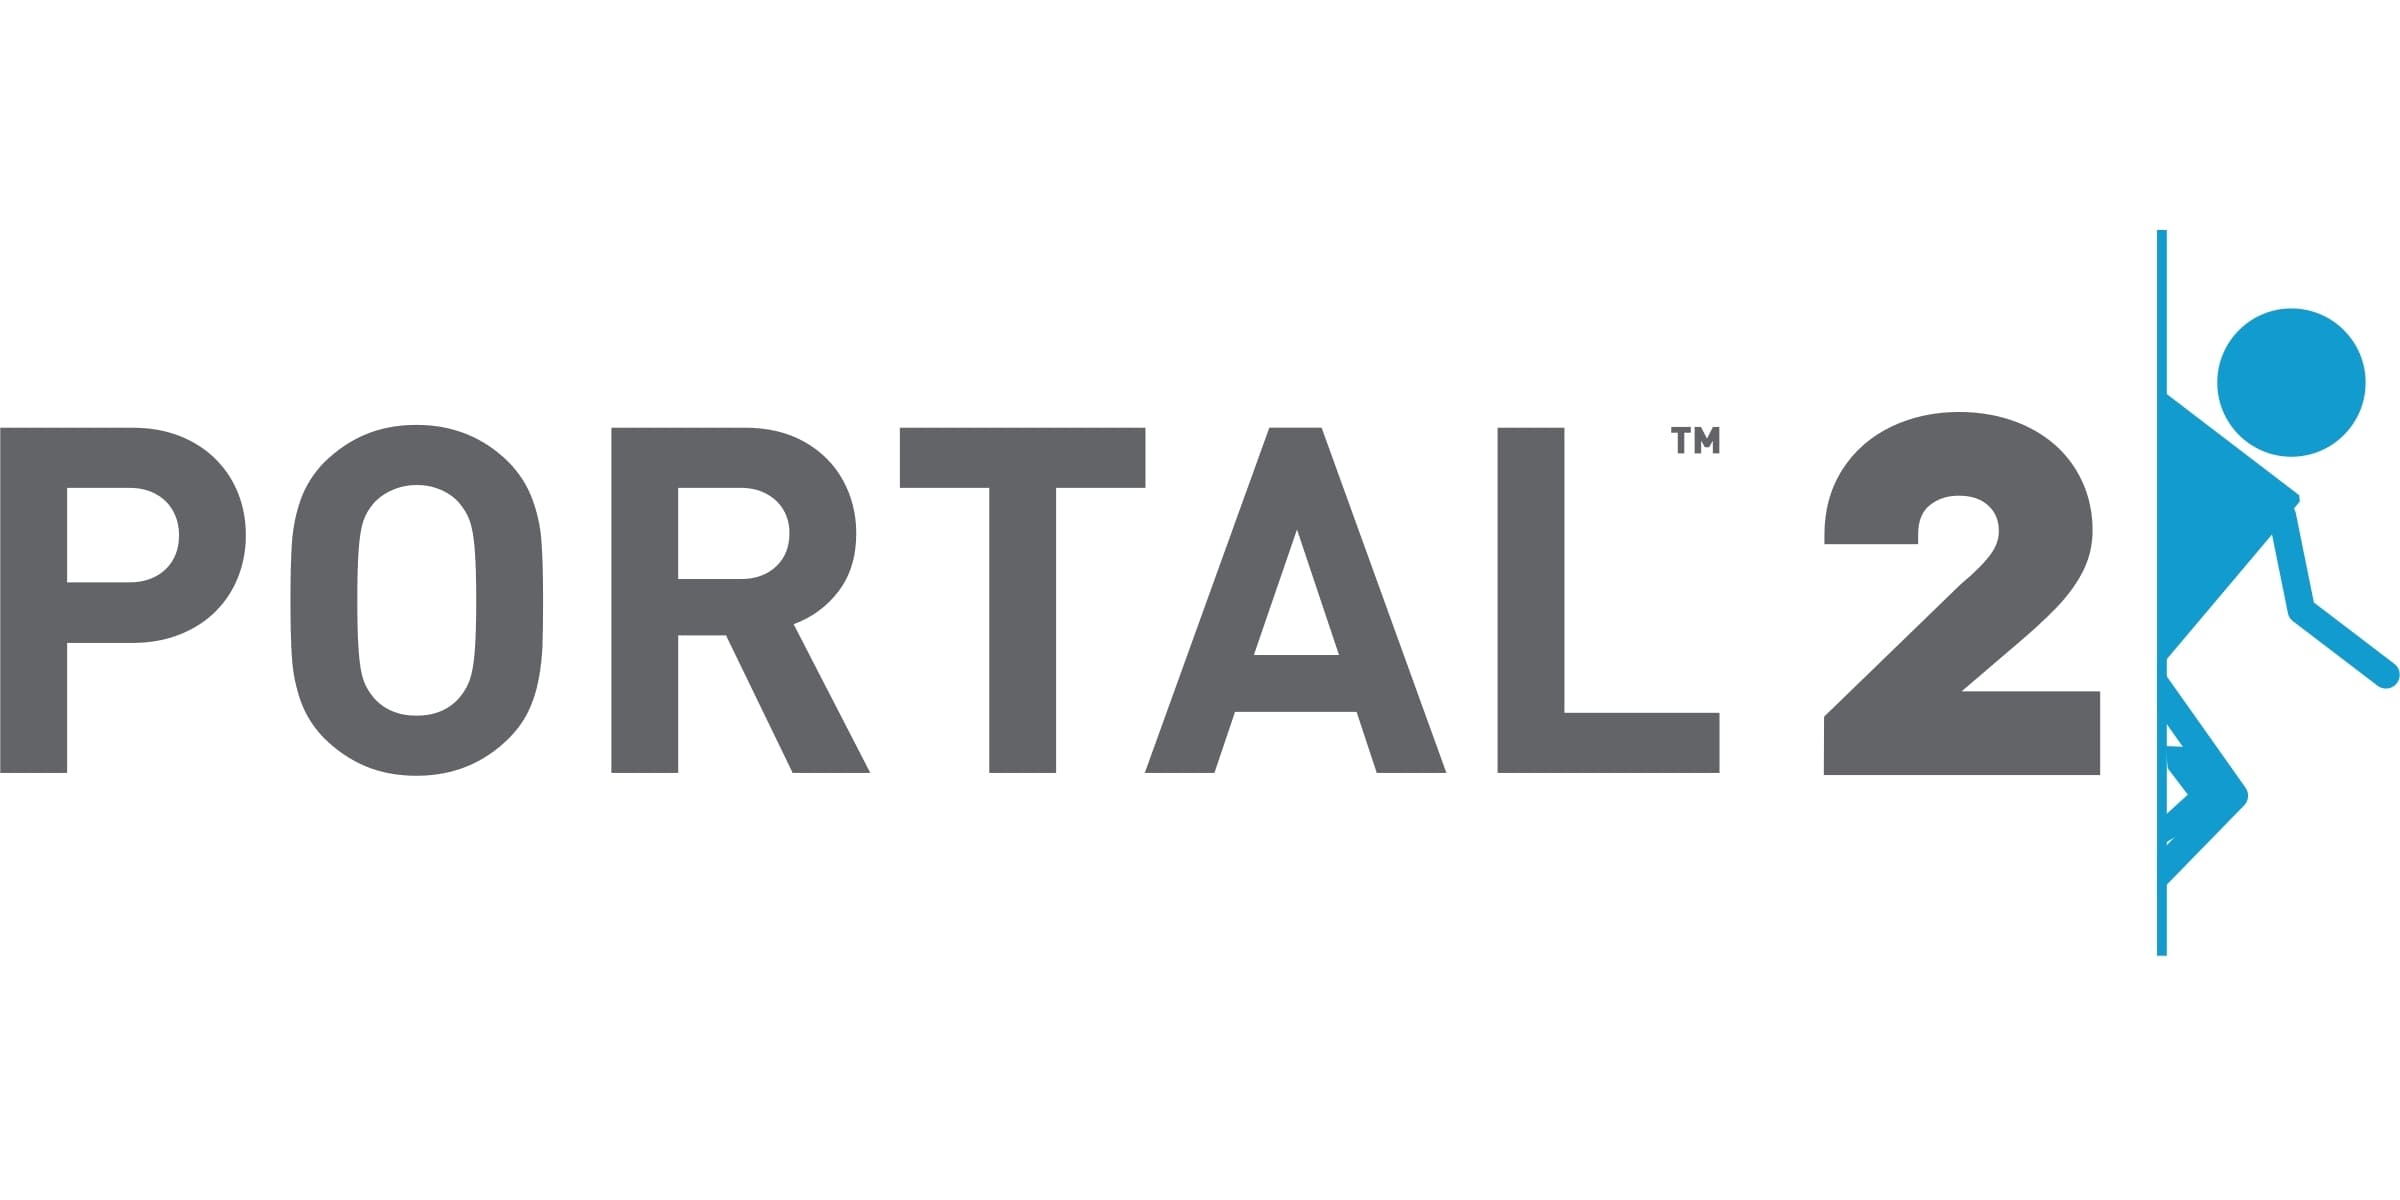 whats the story of portal and portal 2